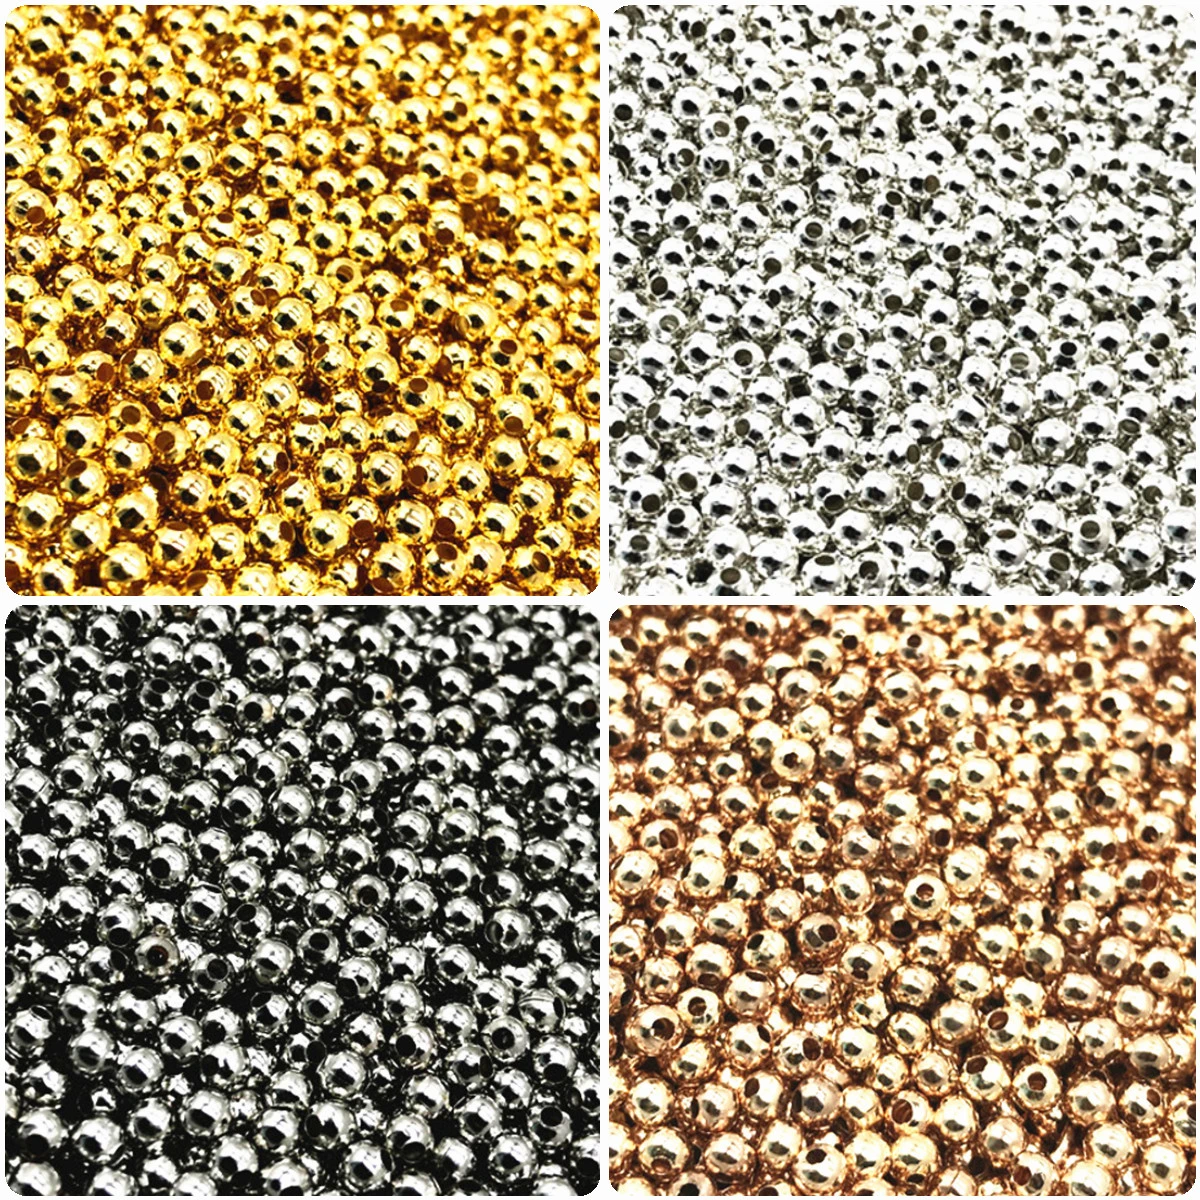 500/200/50pcs 2/4/6mm Gold/Bronze Tone Metal Beads Smooth Ball Spacer Beads For Jewelry Making DIY Bracelet Necklace Accessories